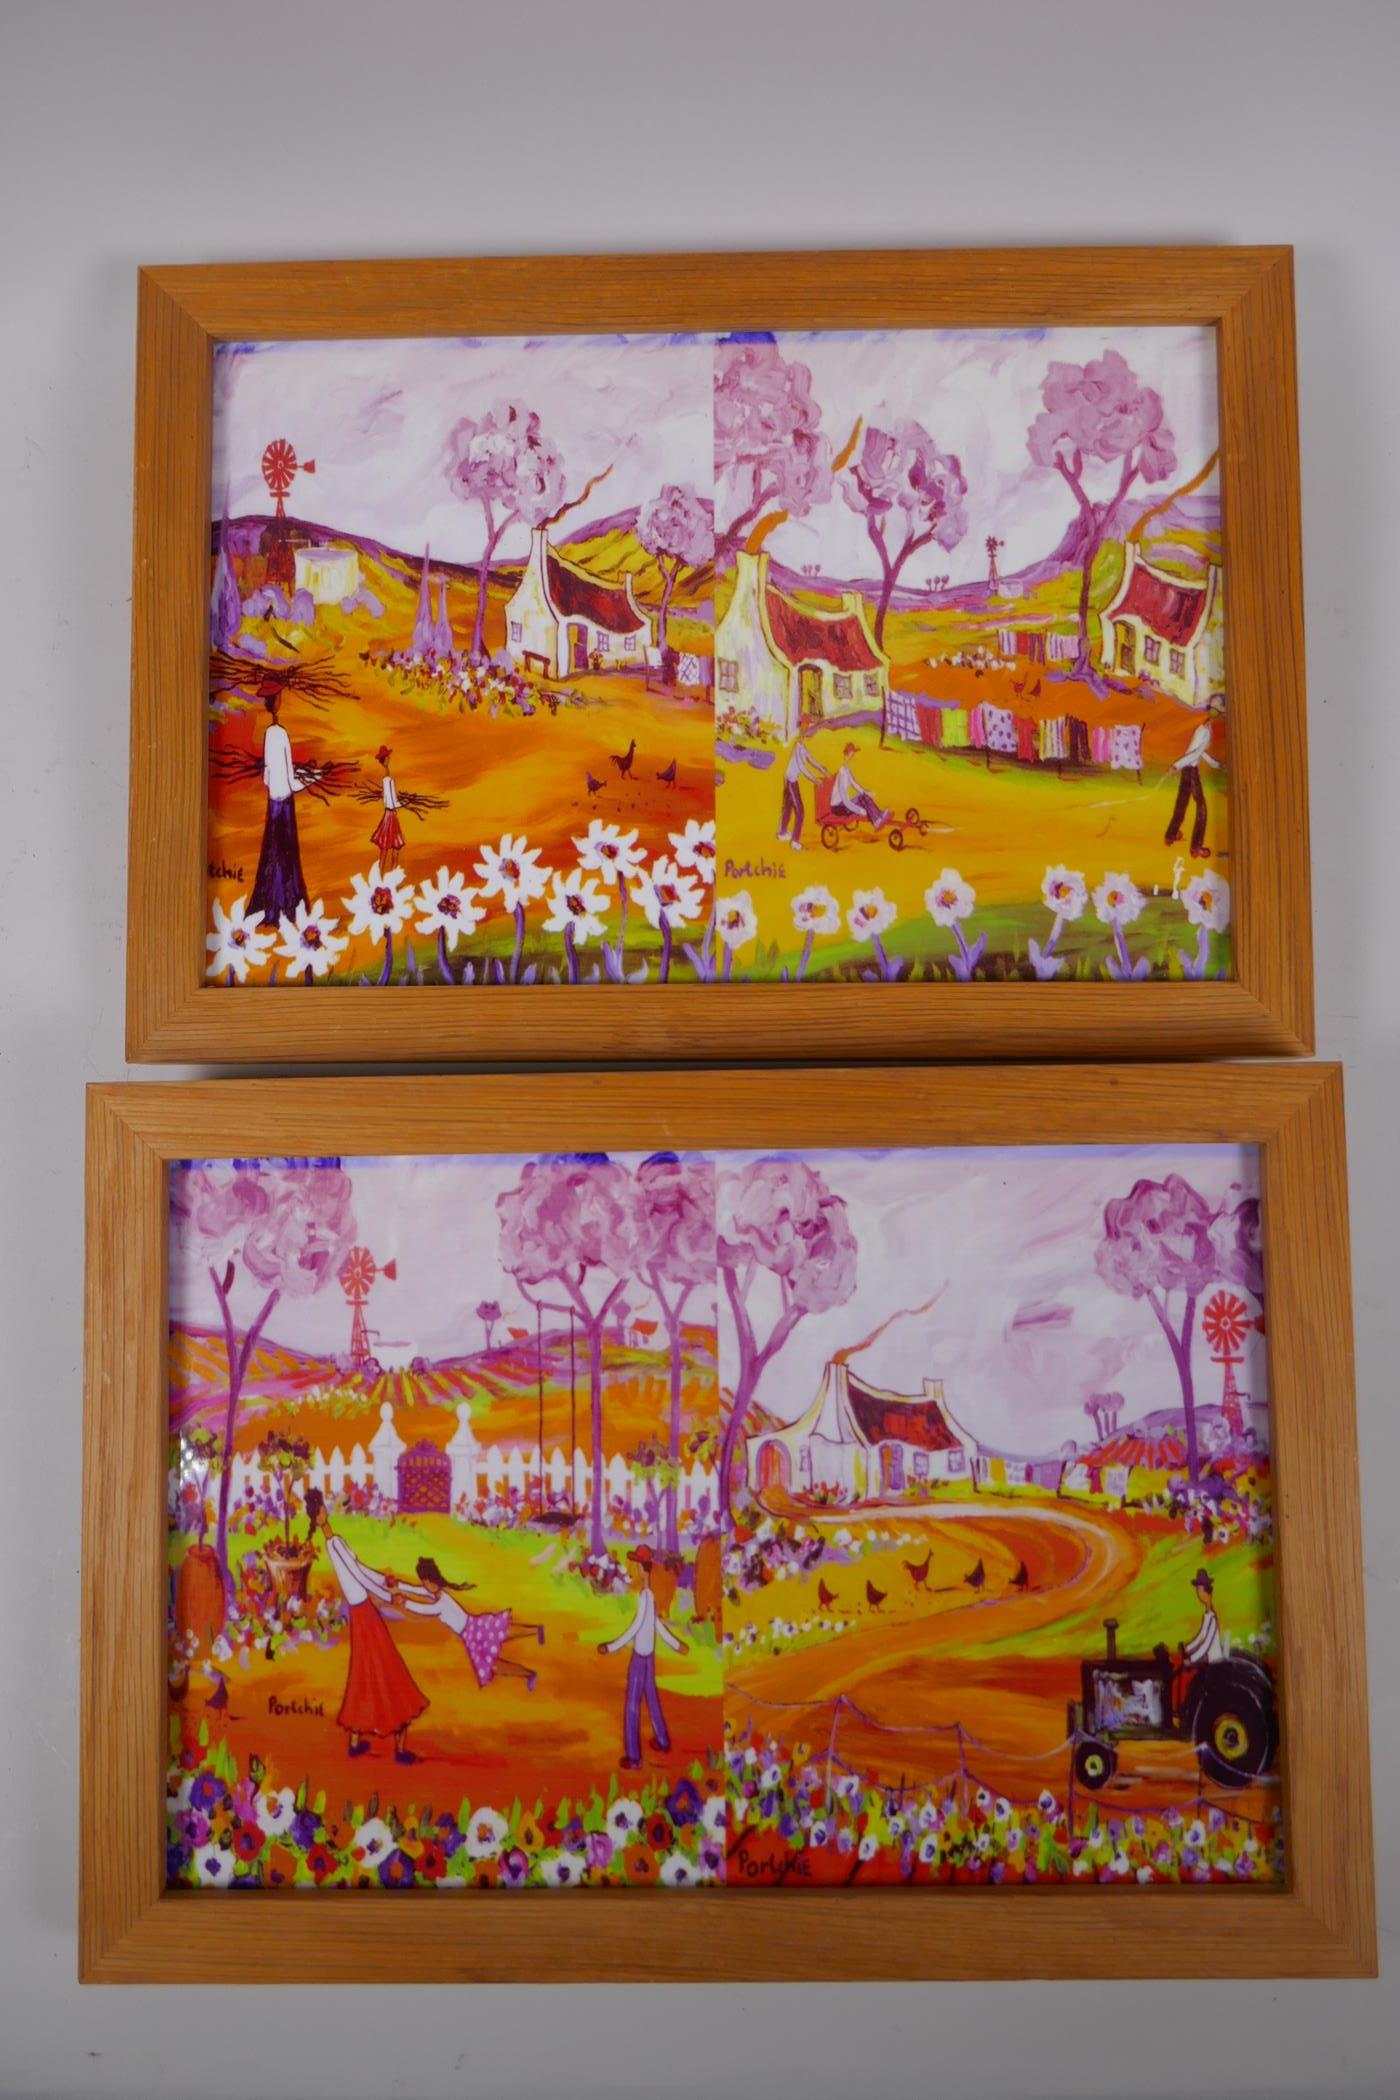 Portchie, (South African, b.1963), two printed tile panels depicting four rural paintings, 23 x 33cm